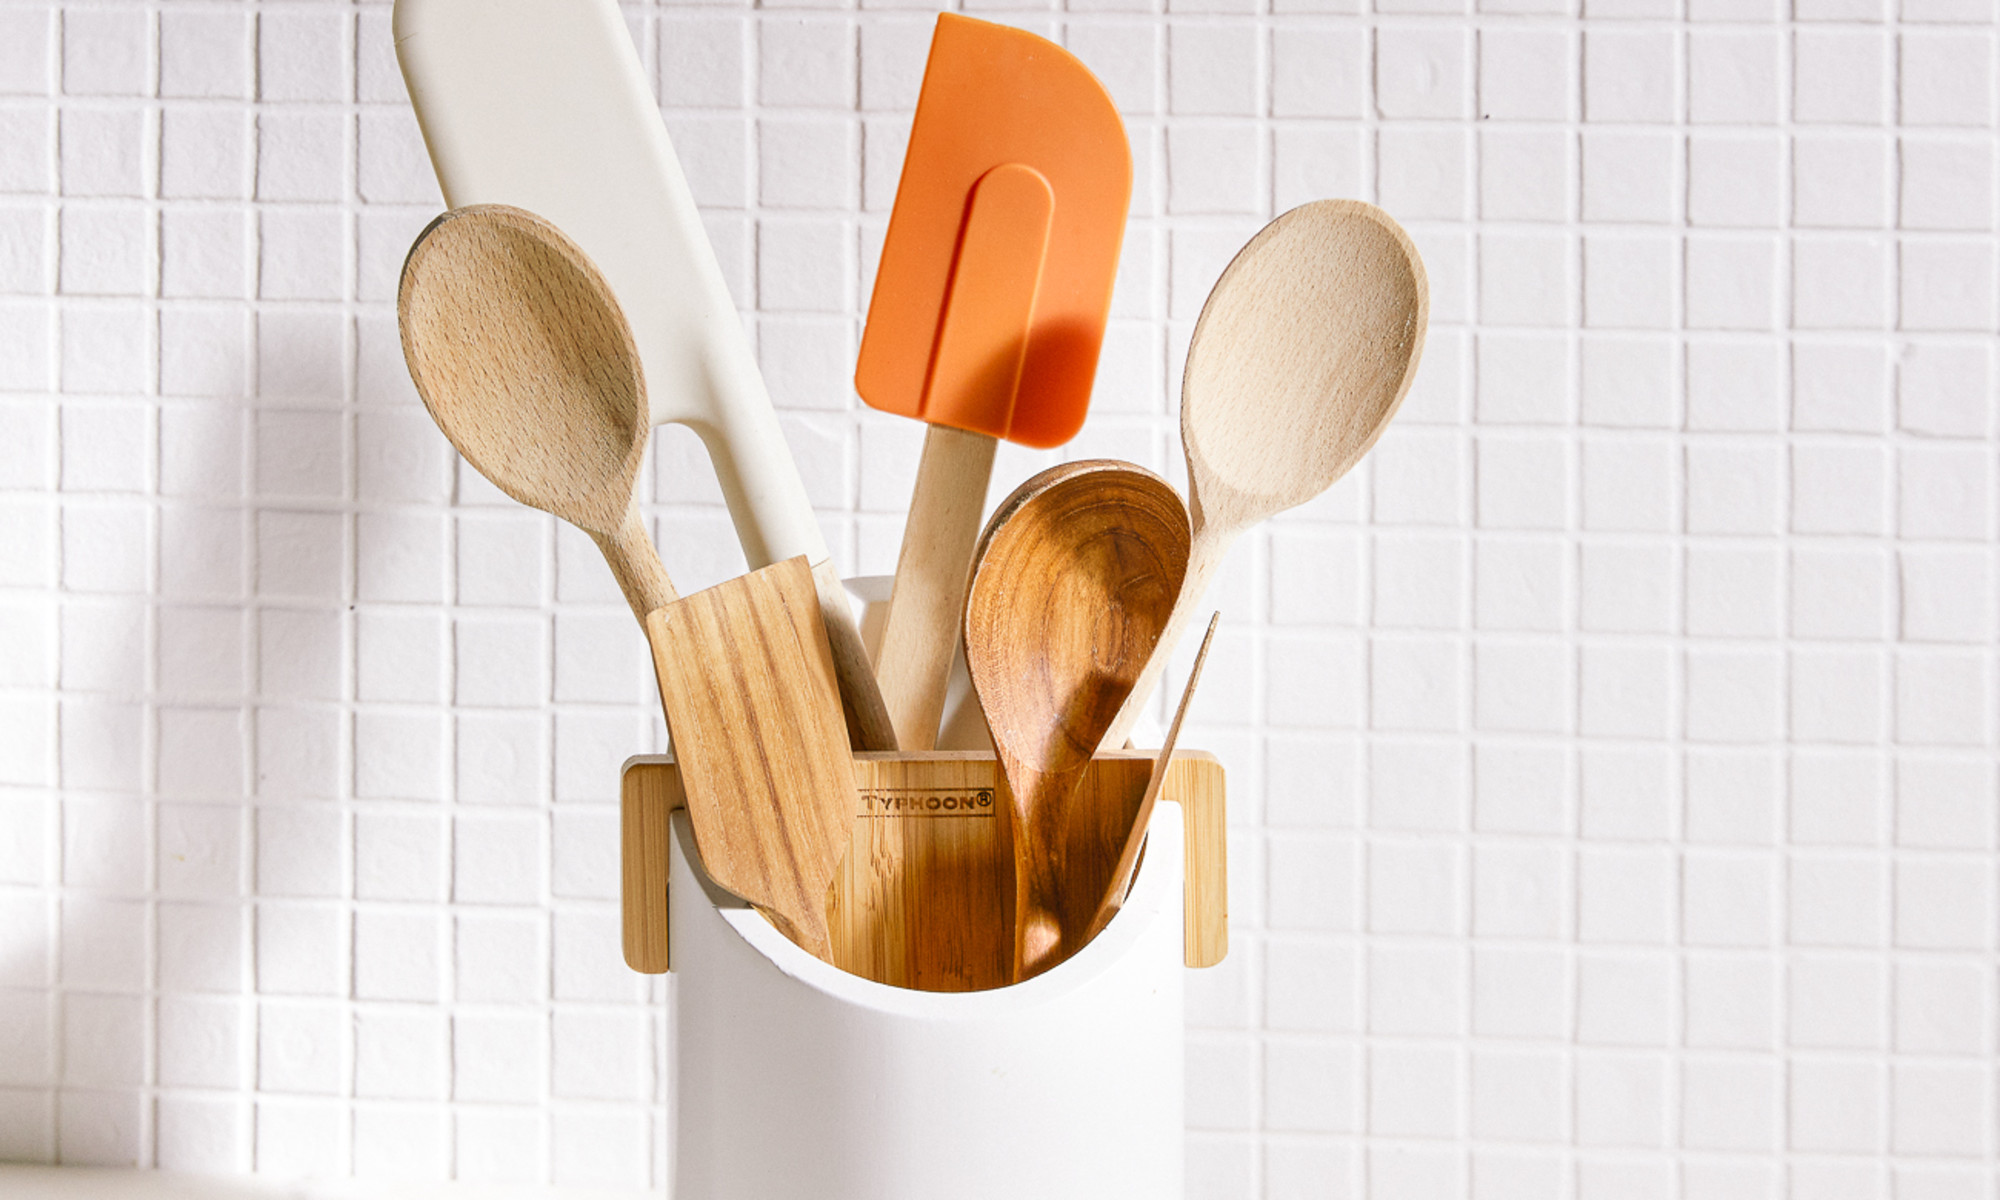 Why Plastic Cooking Utensils Are Toxic